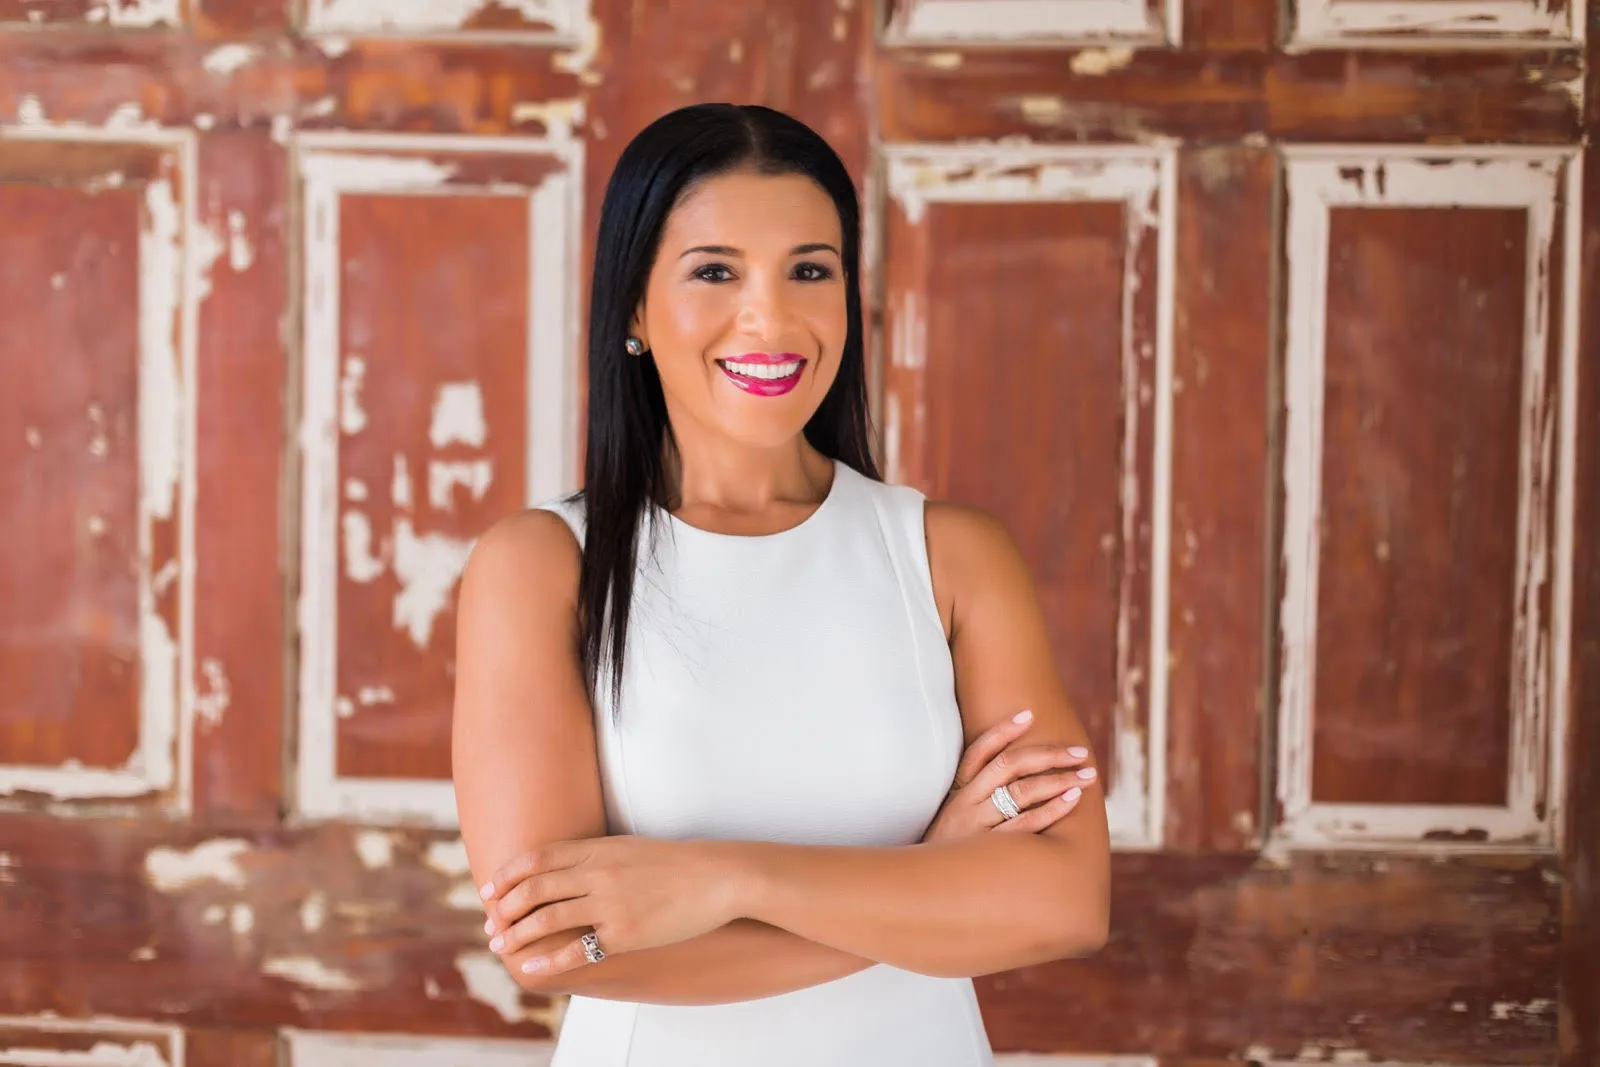 HGTV star Page Turner to host fourth annual Power of WE Luncheon at Belmont University